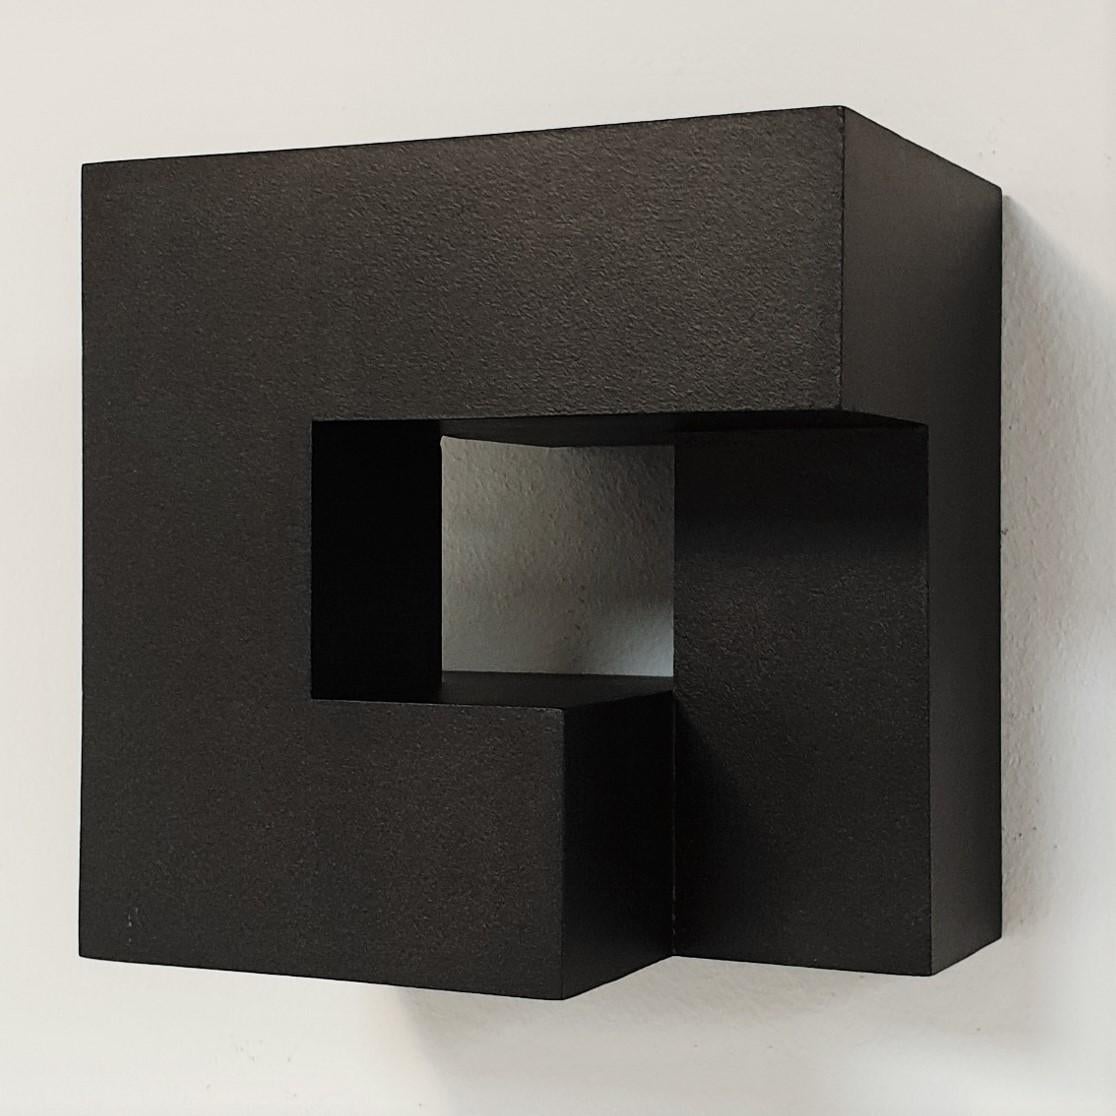 Olivier Julia Abstract Painting - Carré architectural II no. 5/15 - contemporary modern abstract wall sculpture